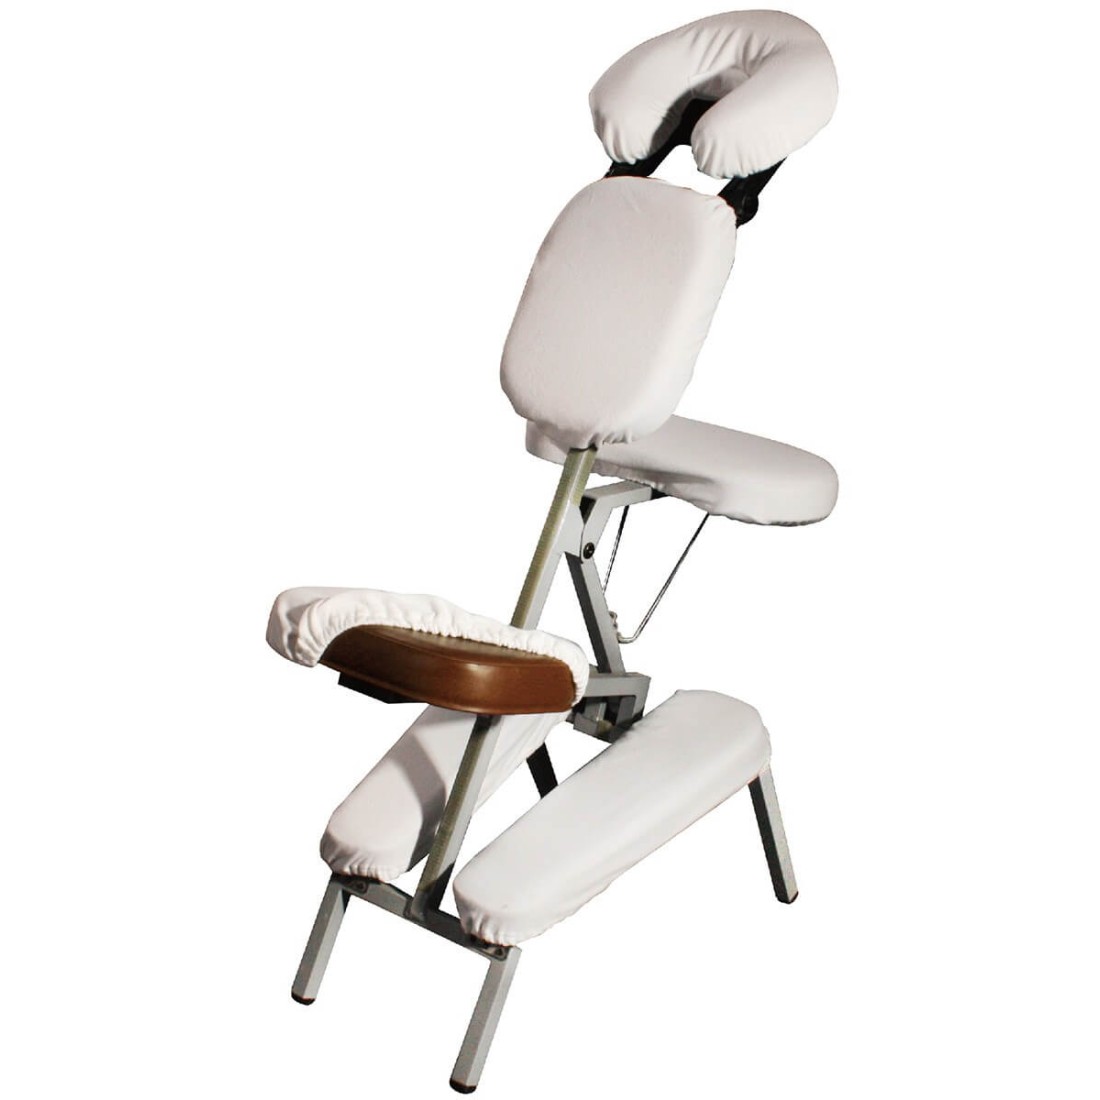 https://www.boreas-medical-sport.fr/images/detailed/103/housse-protection-chaise-massage.jpg